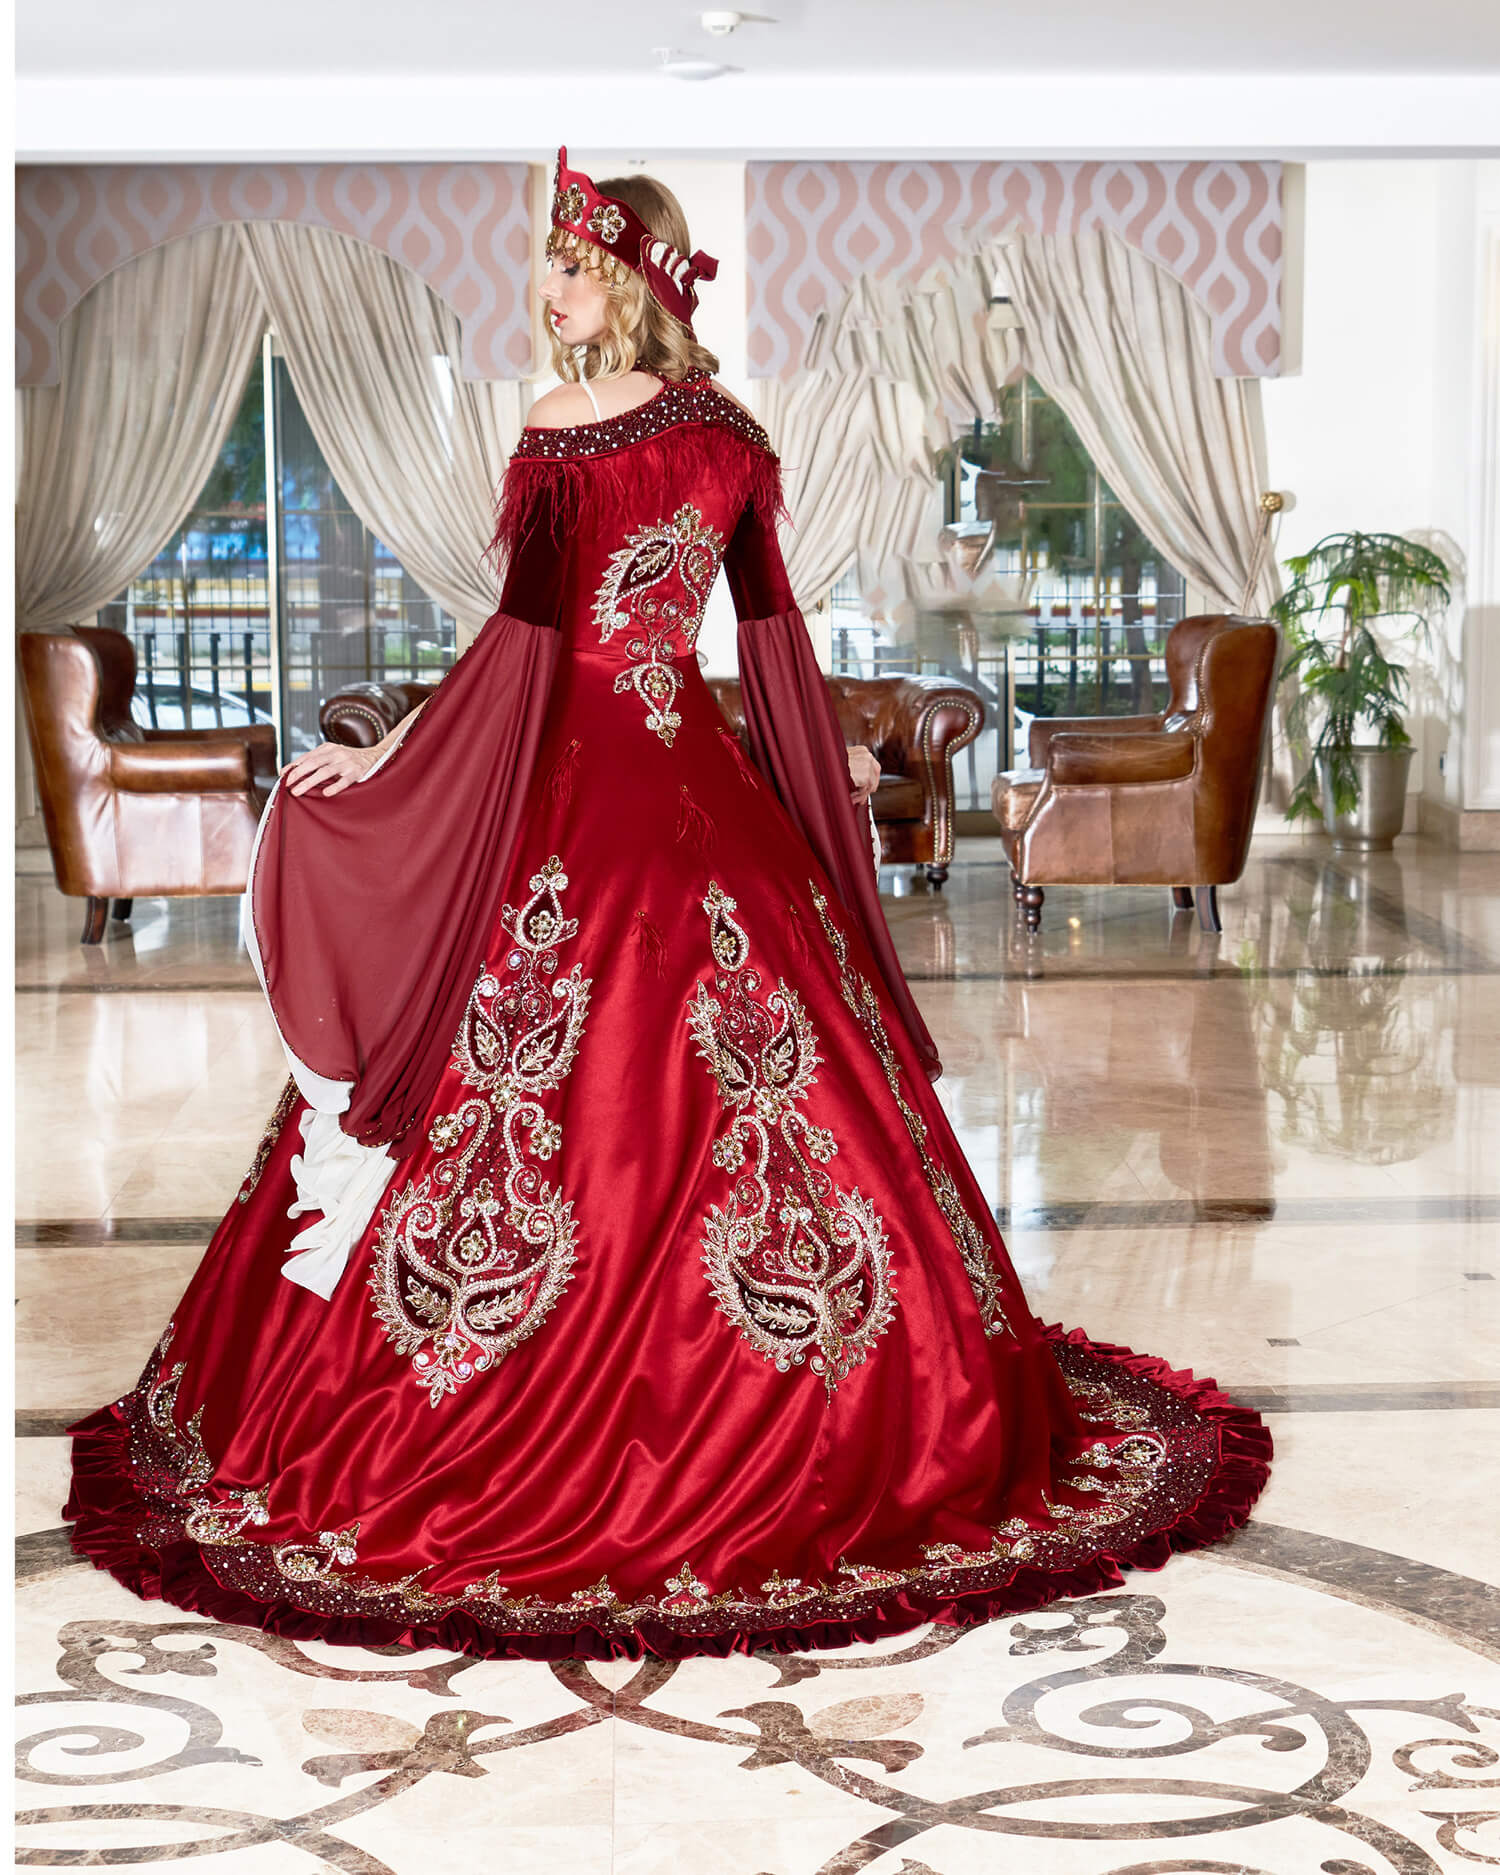 Puffy Model Tulle Claret Red Henna Dress